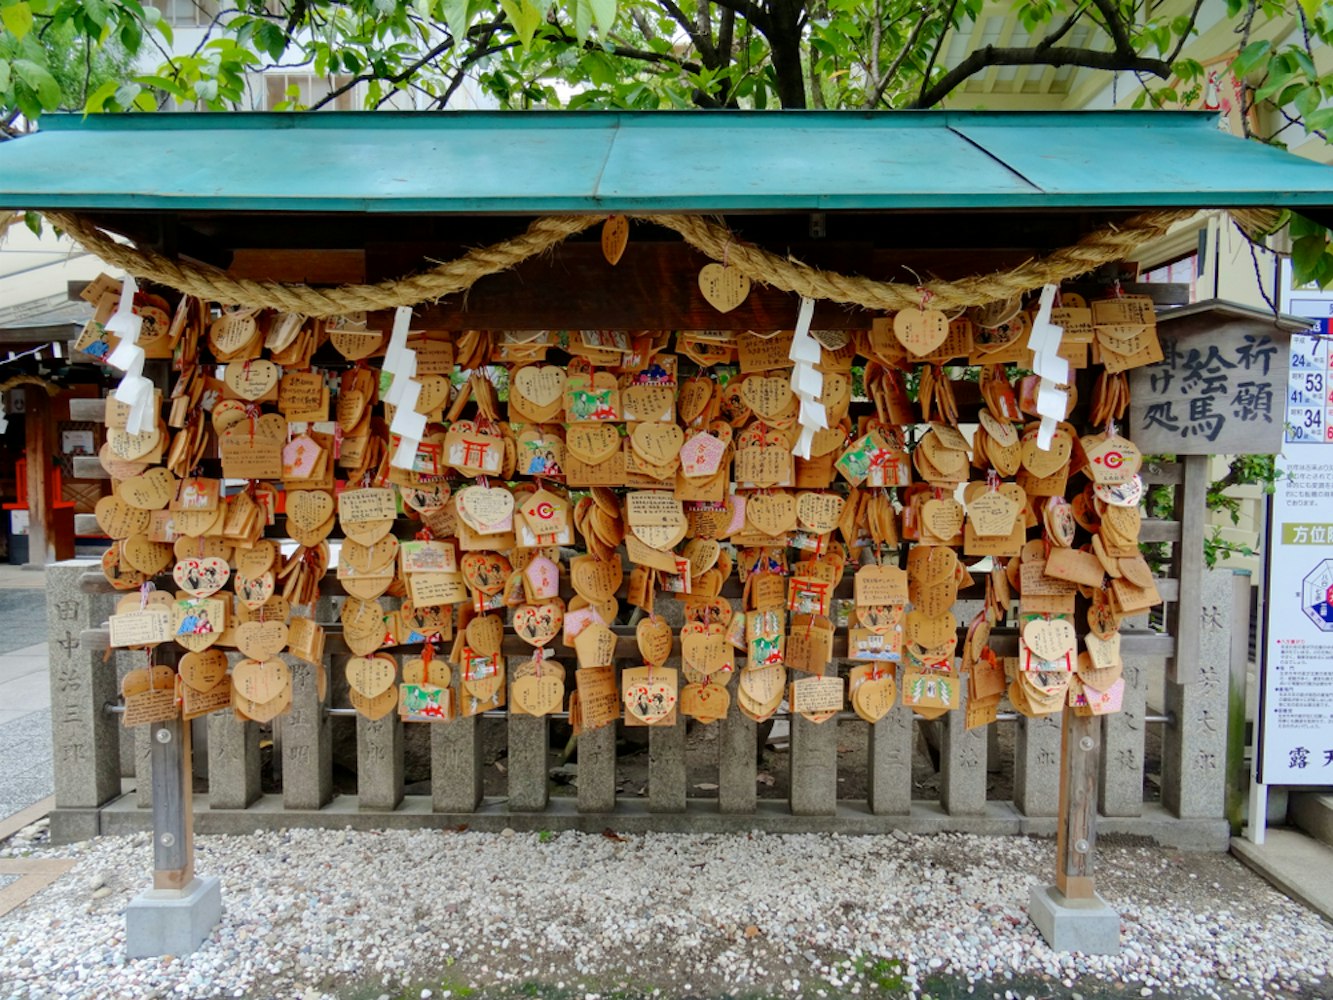 Picture of many Ema's (votive plaques) hanging at the Tsuyunoten Shrine in Osaka